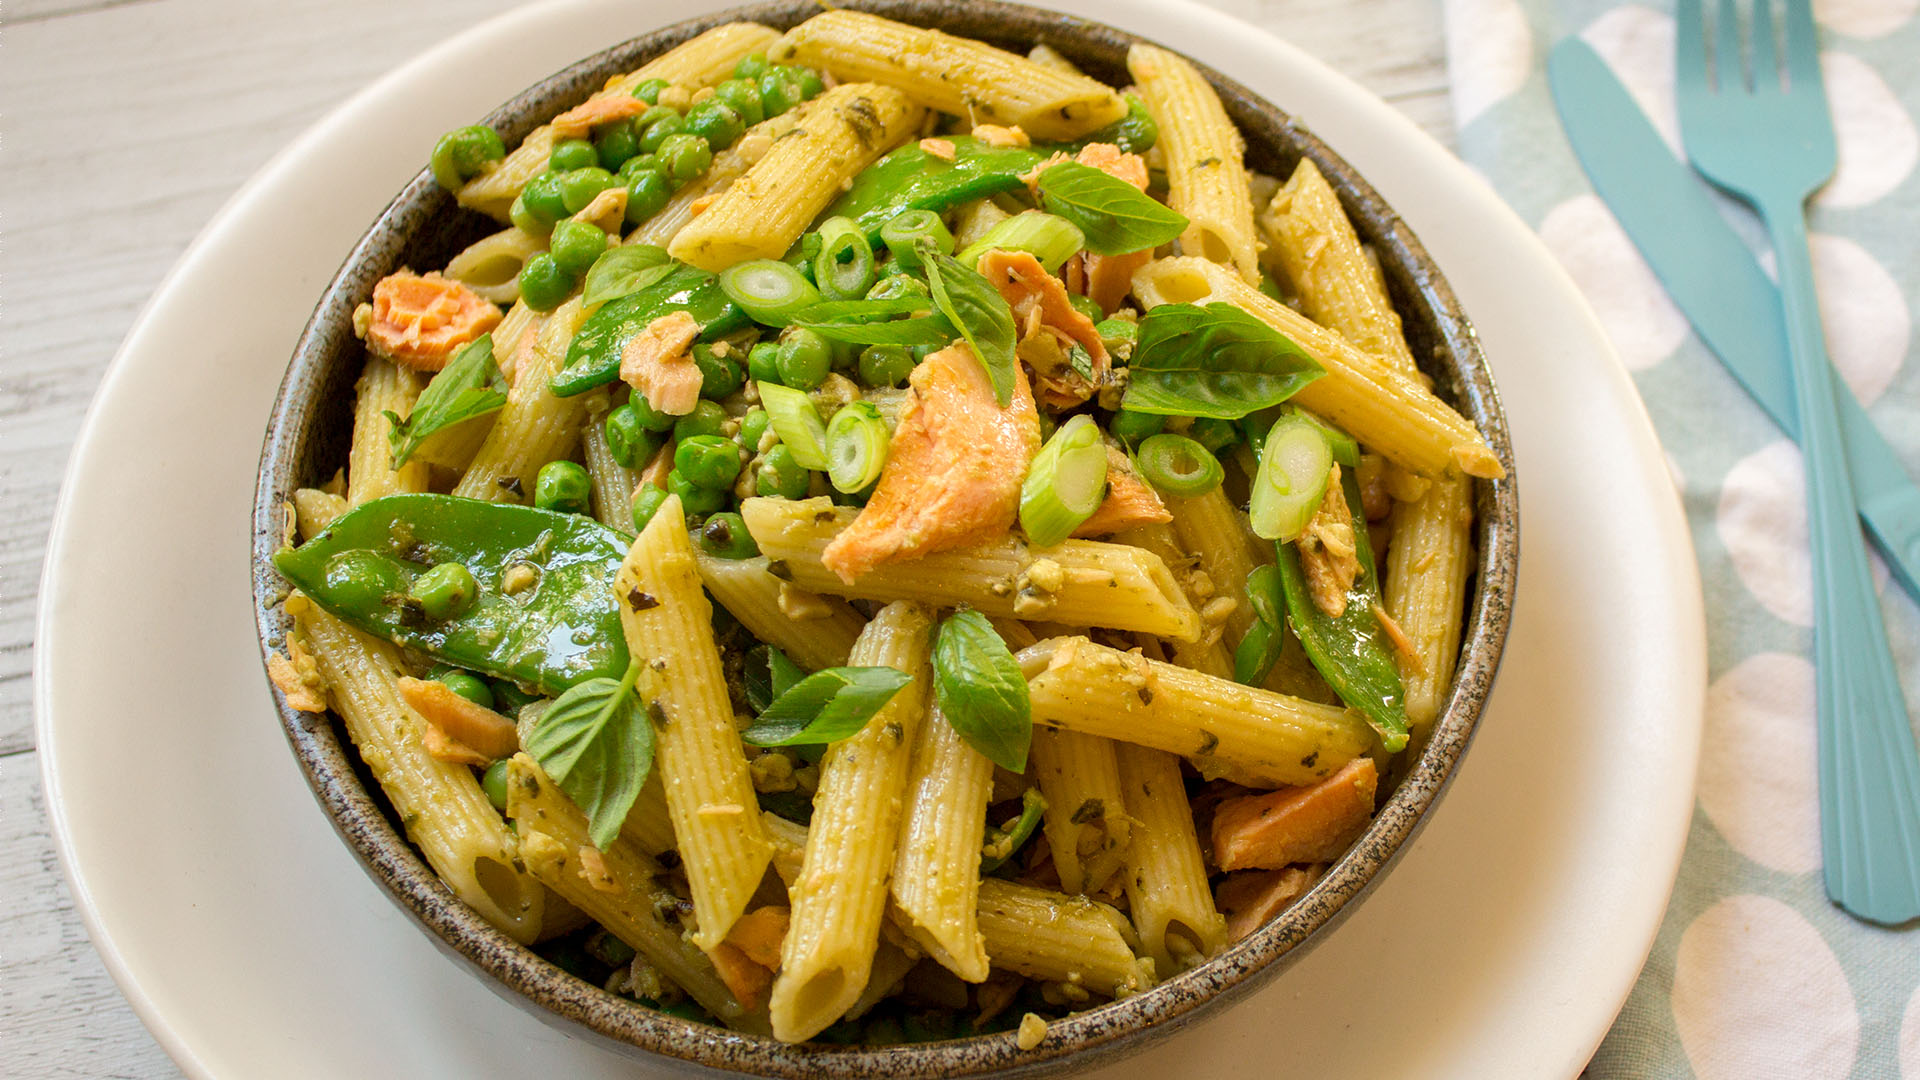 Salmon Pesto Pea Pasta A Quick And Easy Meal Seafood Experts